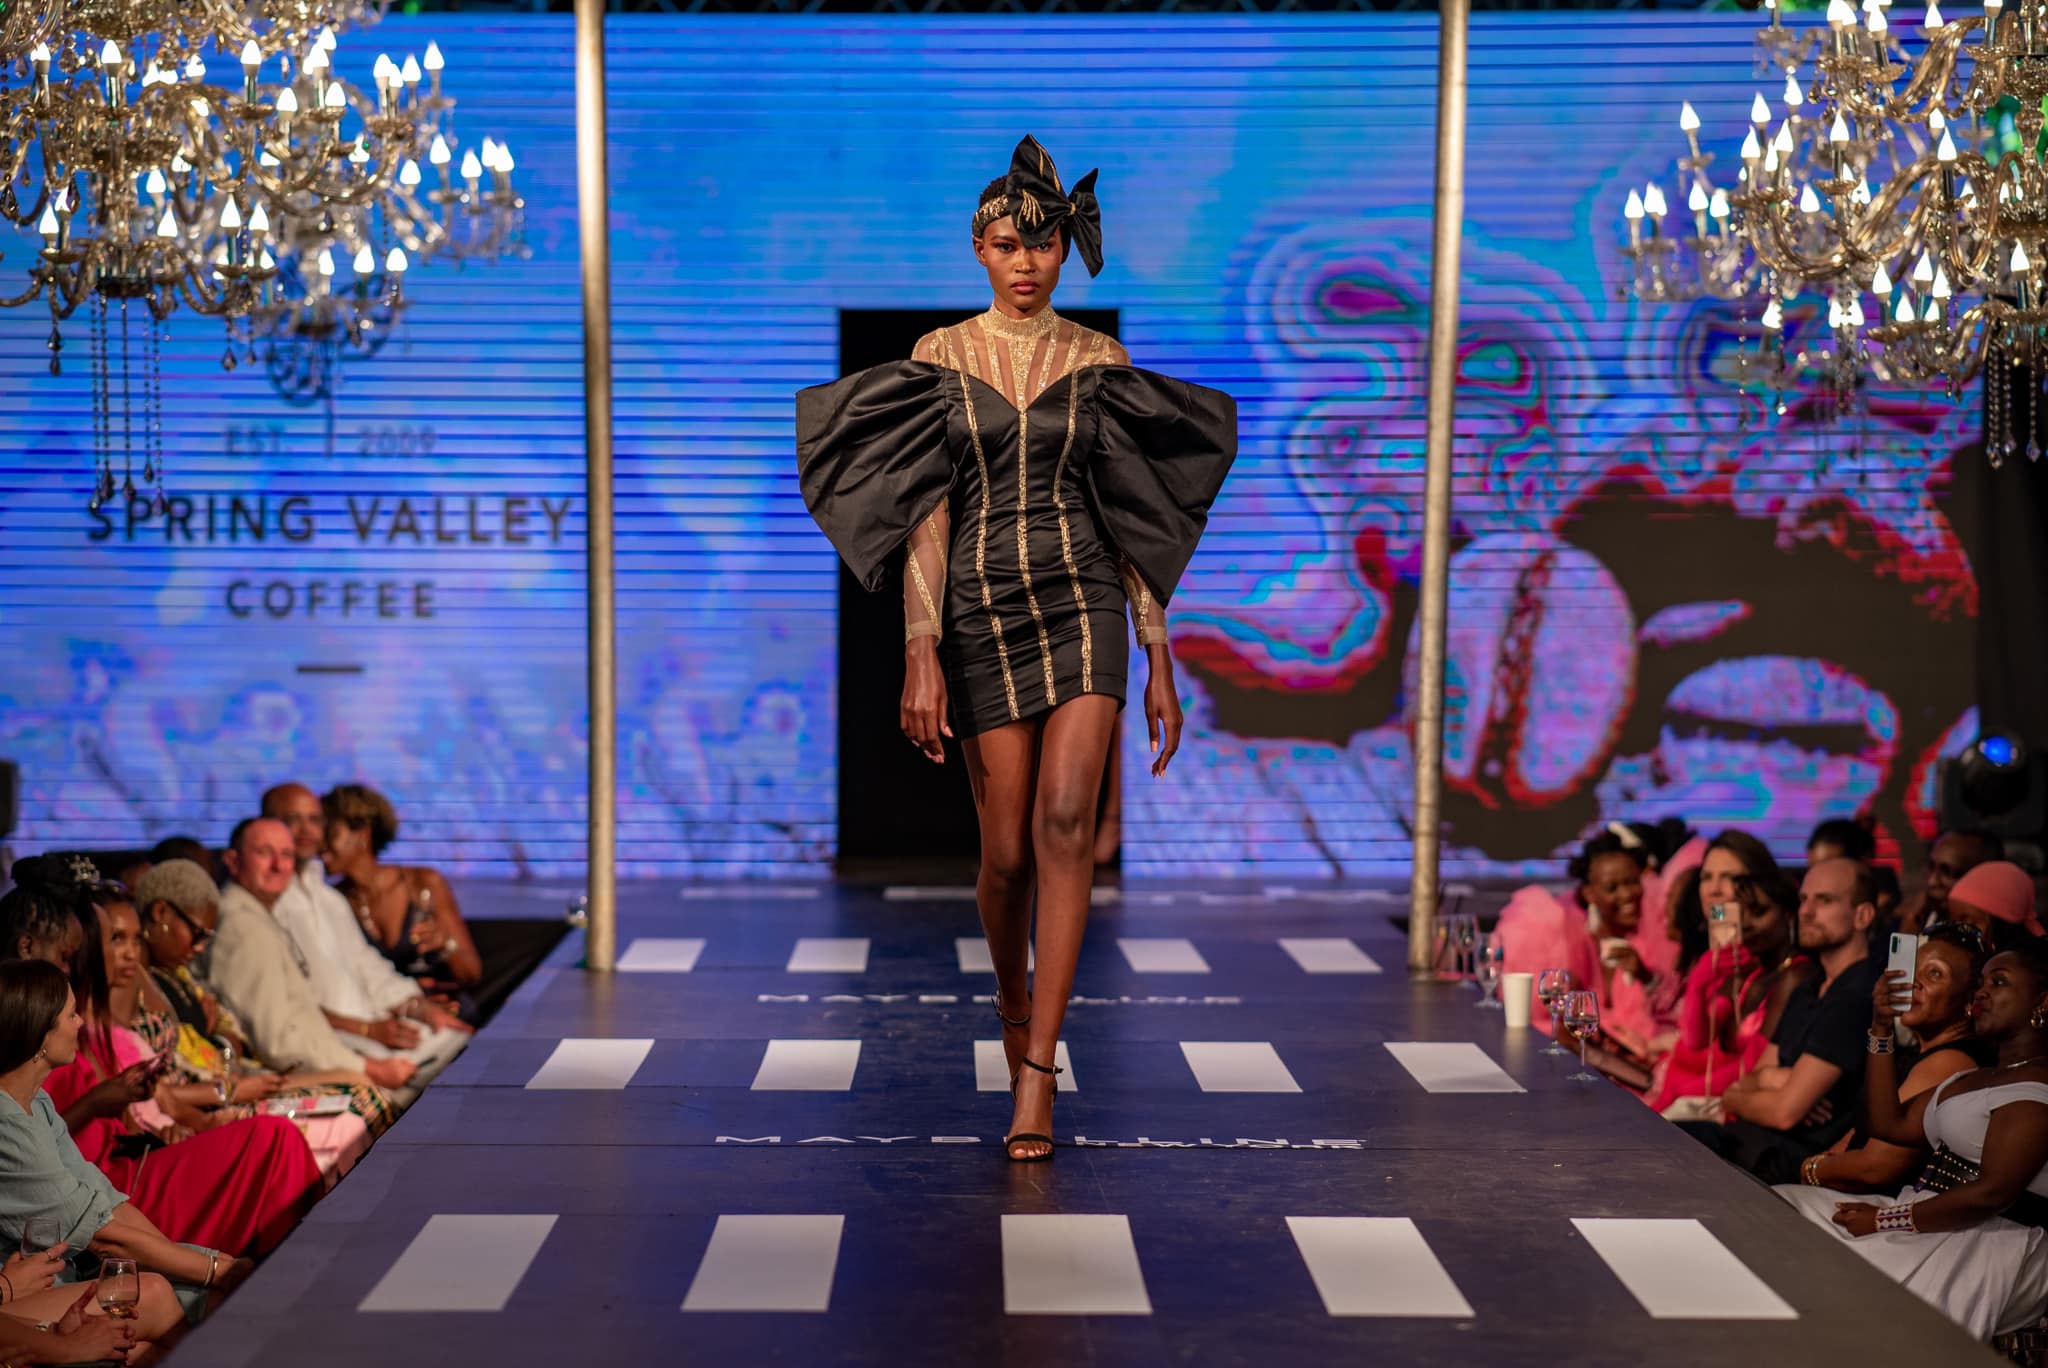 Kenyan models are known internationally to have so much poise, professionalism and elegance on the runway